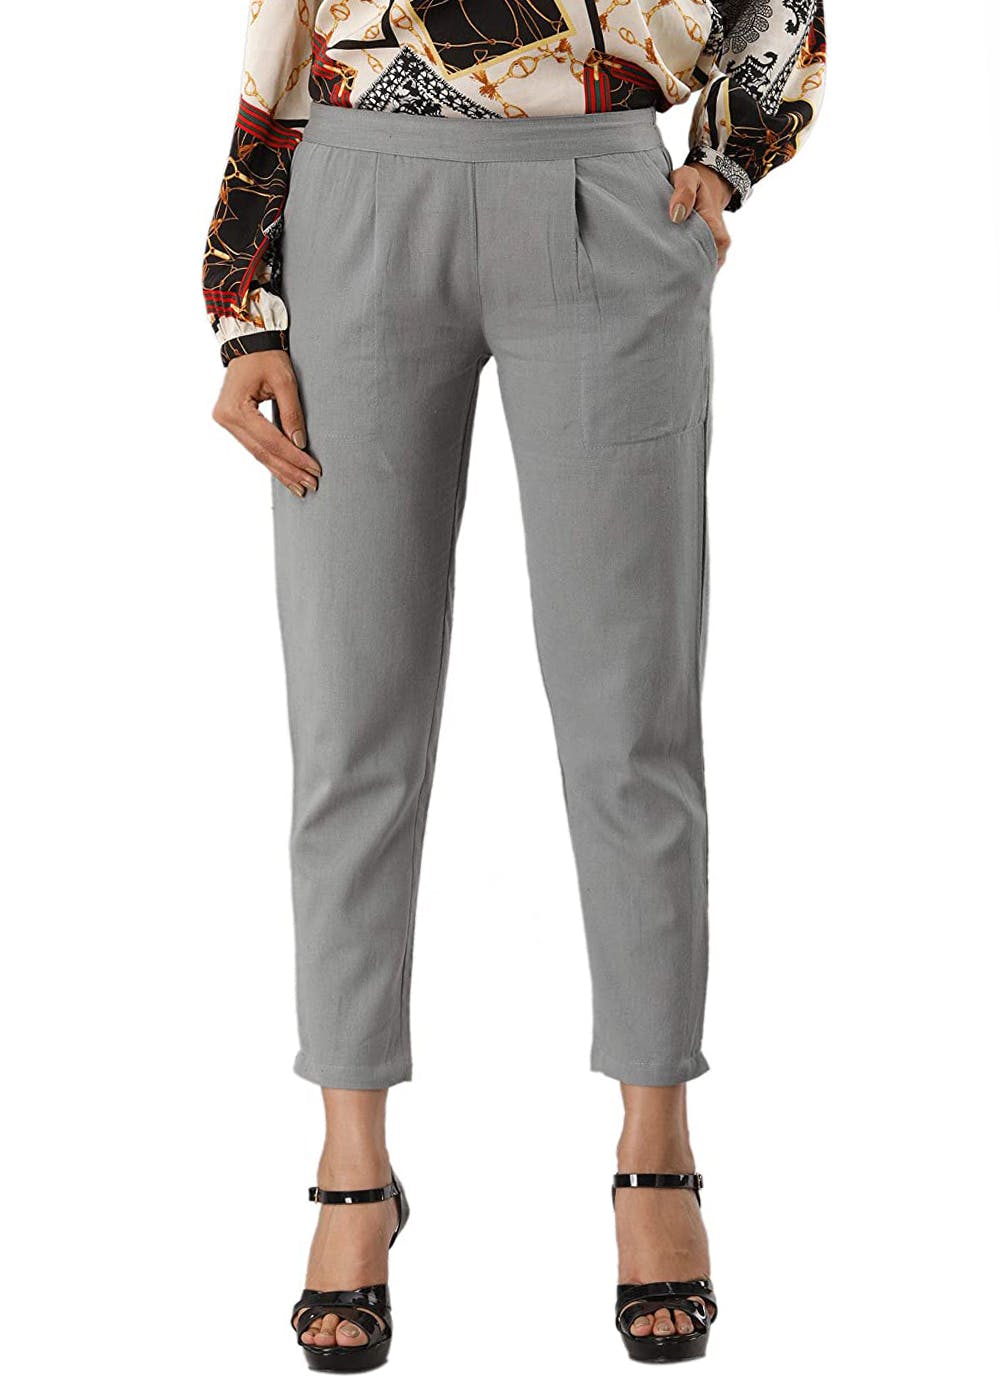 Get Grey Ankle Slit Details Straight Rayon Pants at ₹ 489 | LBB Shop